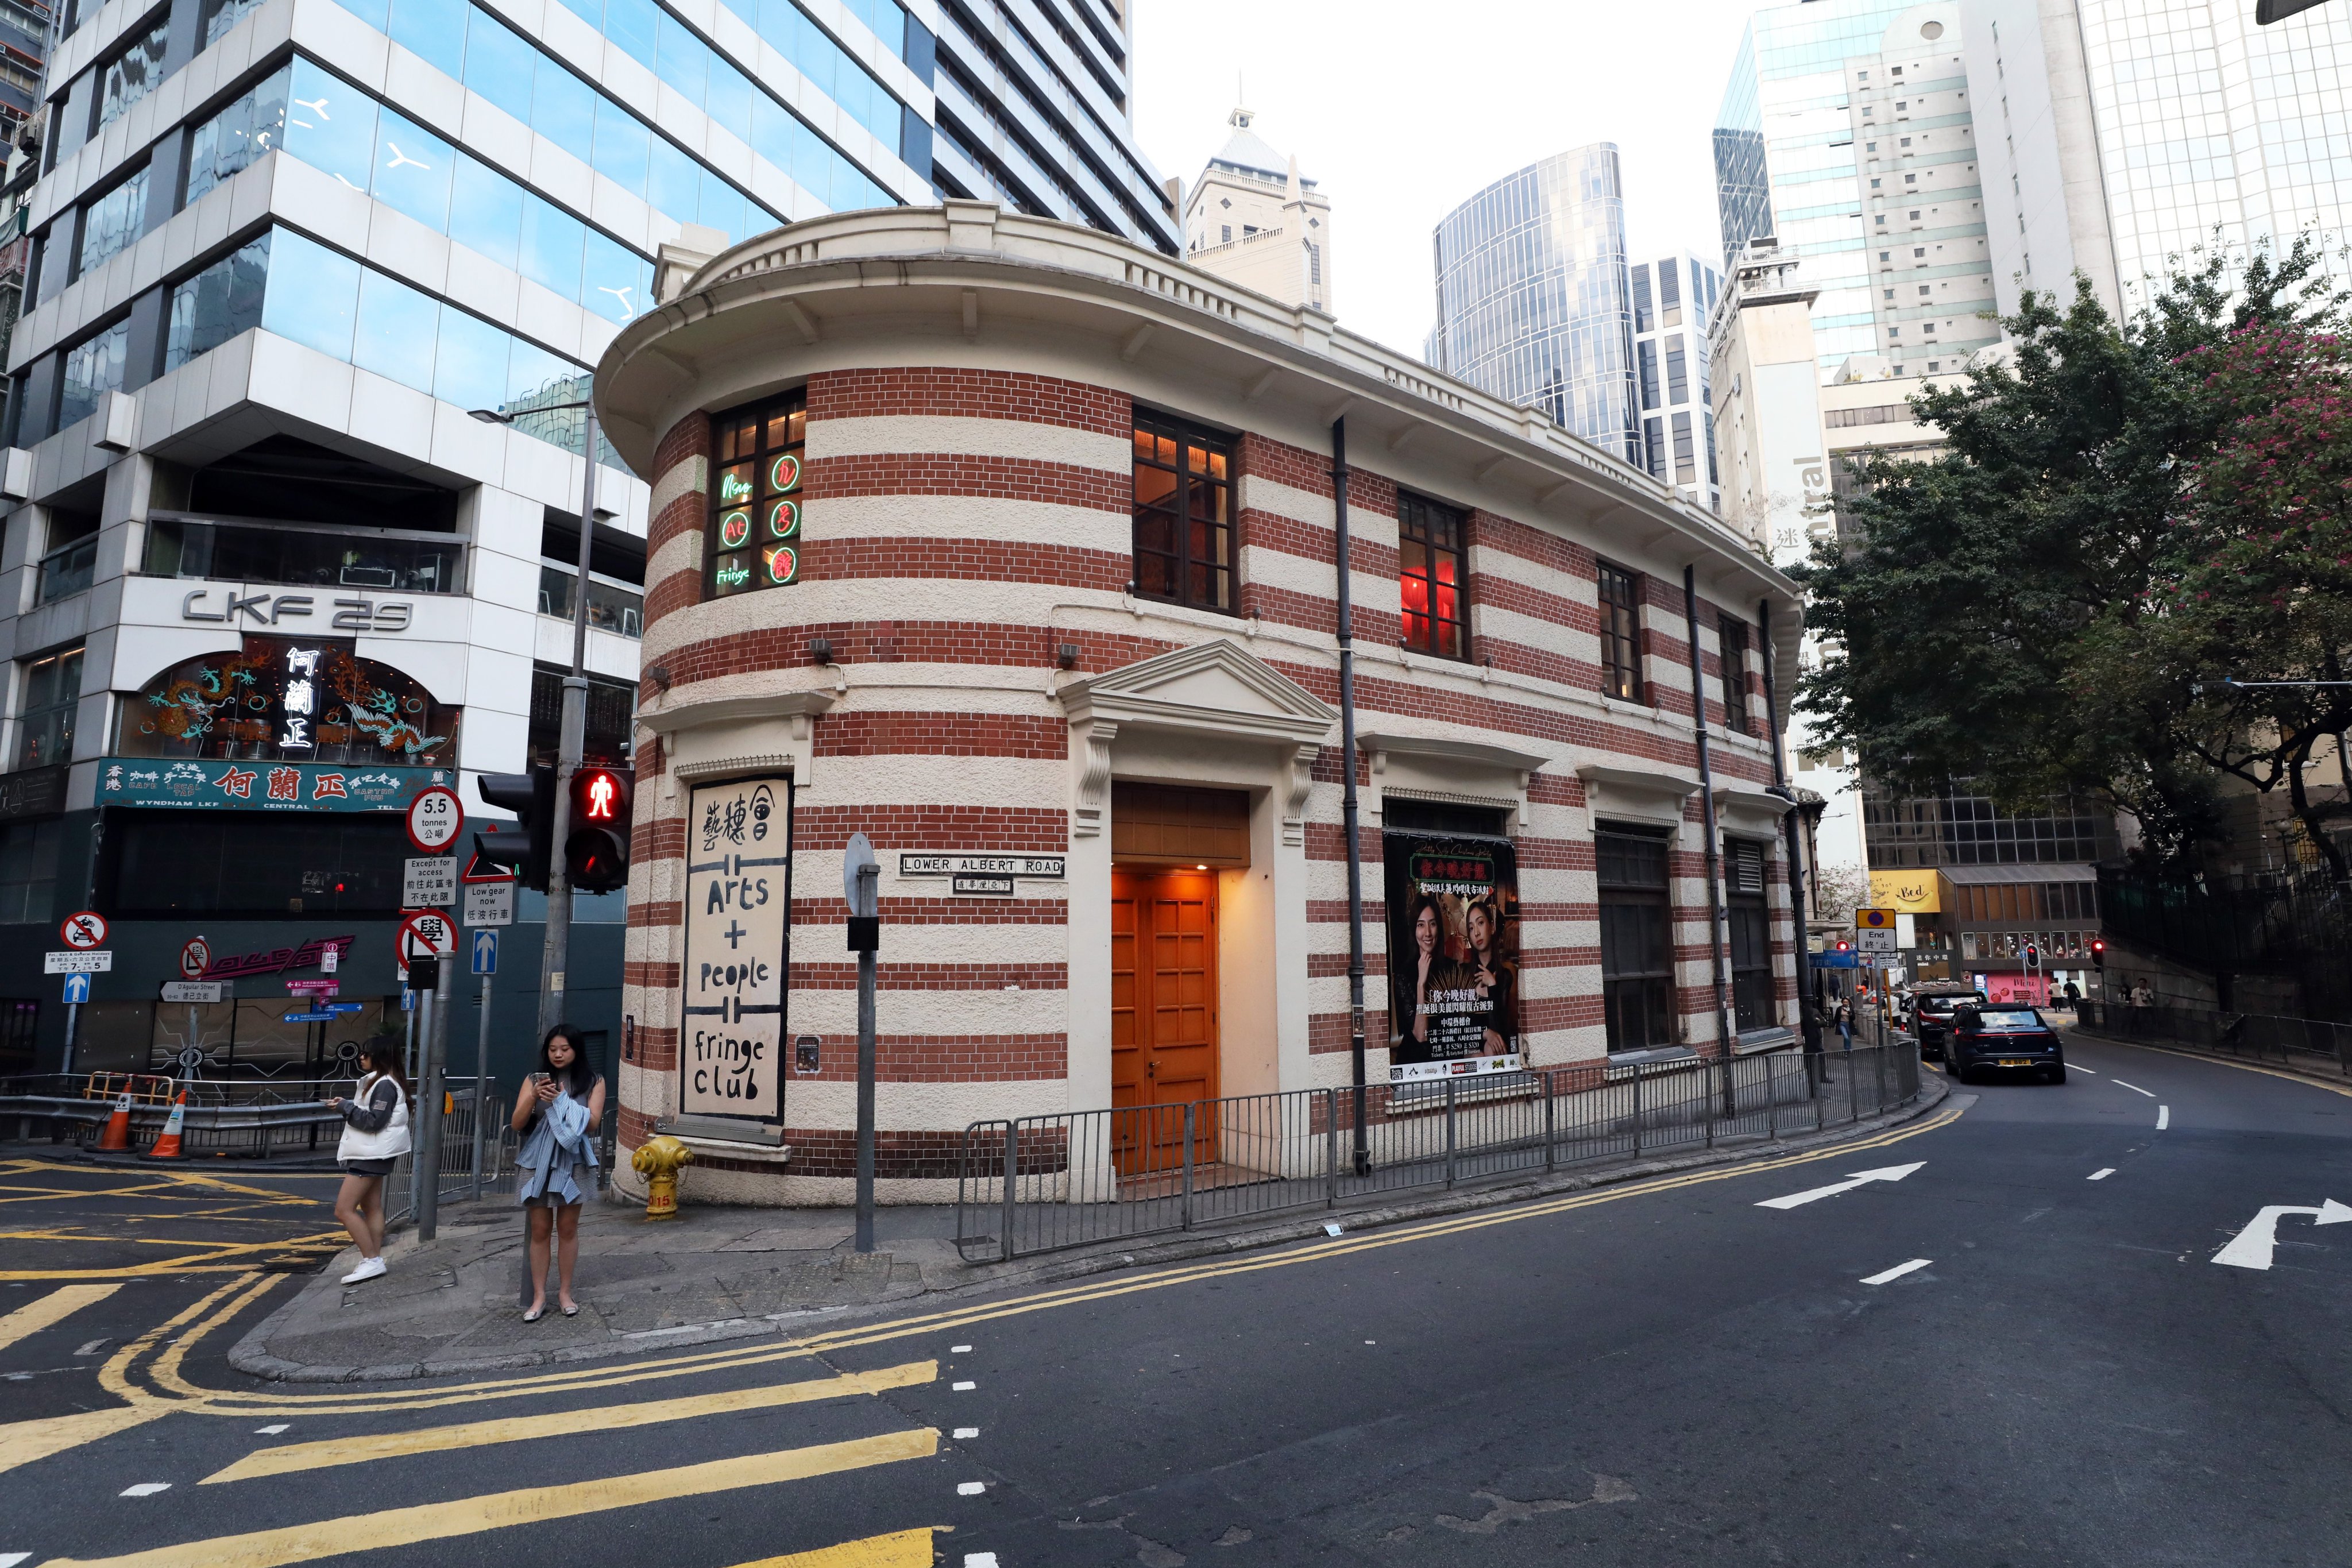 The Hong Kong Fringe Club premises in the Old Dairy Farm Block on the corner of Lower Albert Road and Wyndham Street, Central, the arts body’s home for the past 40 years. It has won government approval to continue leasing the premises rent-free. Photo: Sun Yeung